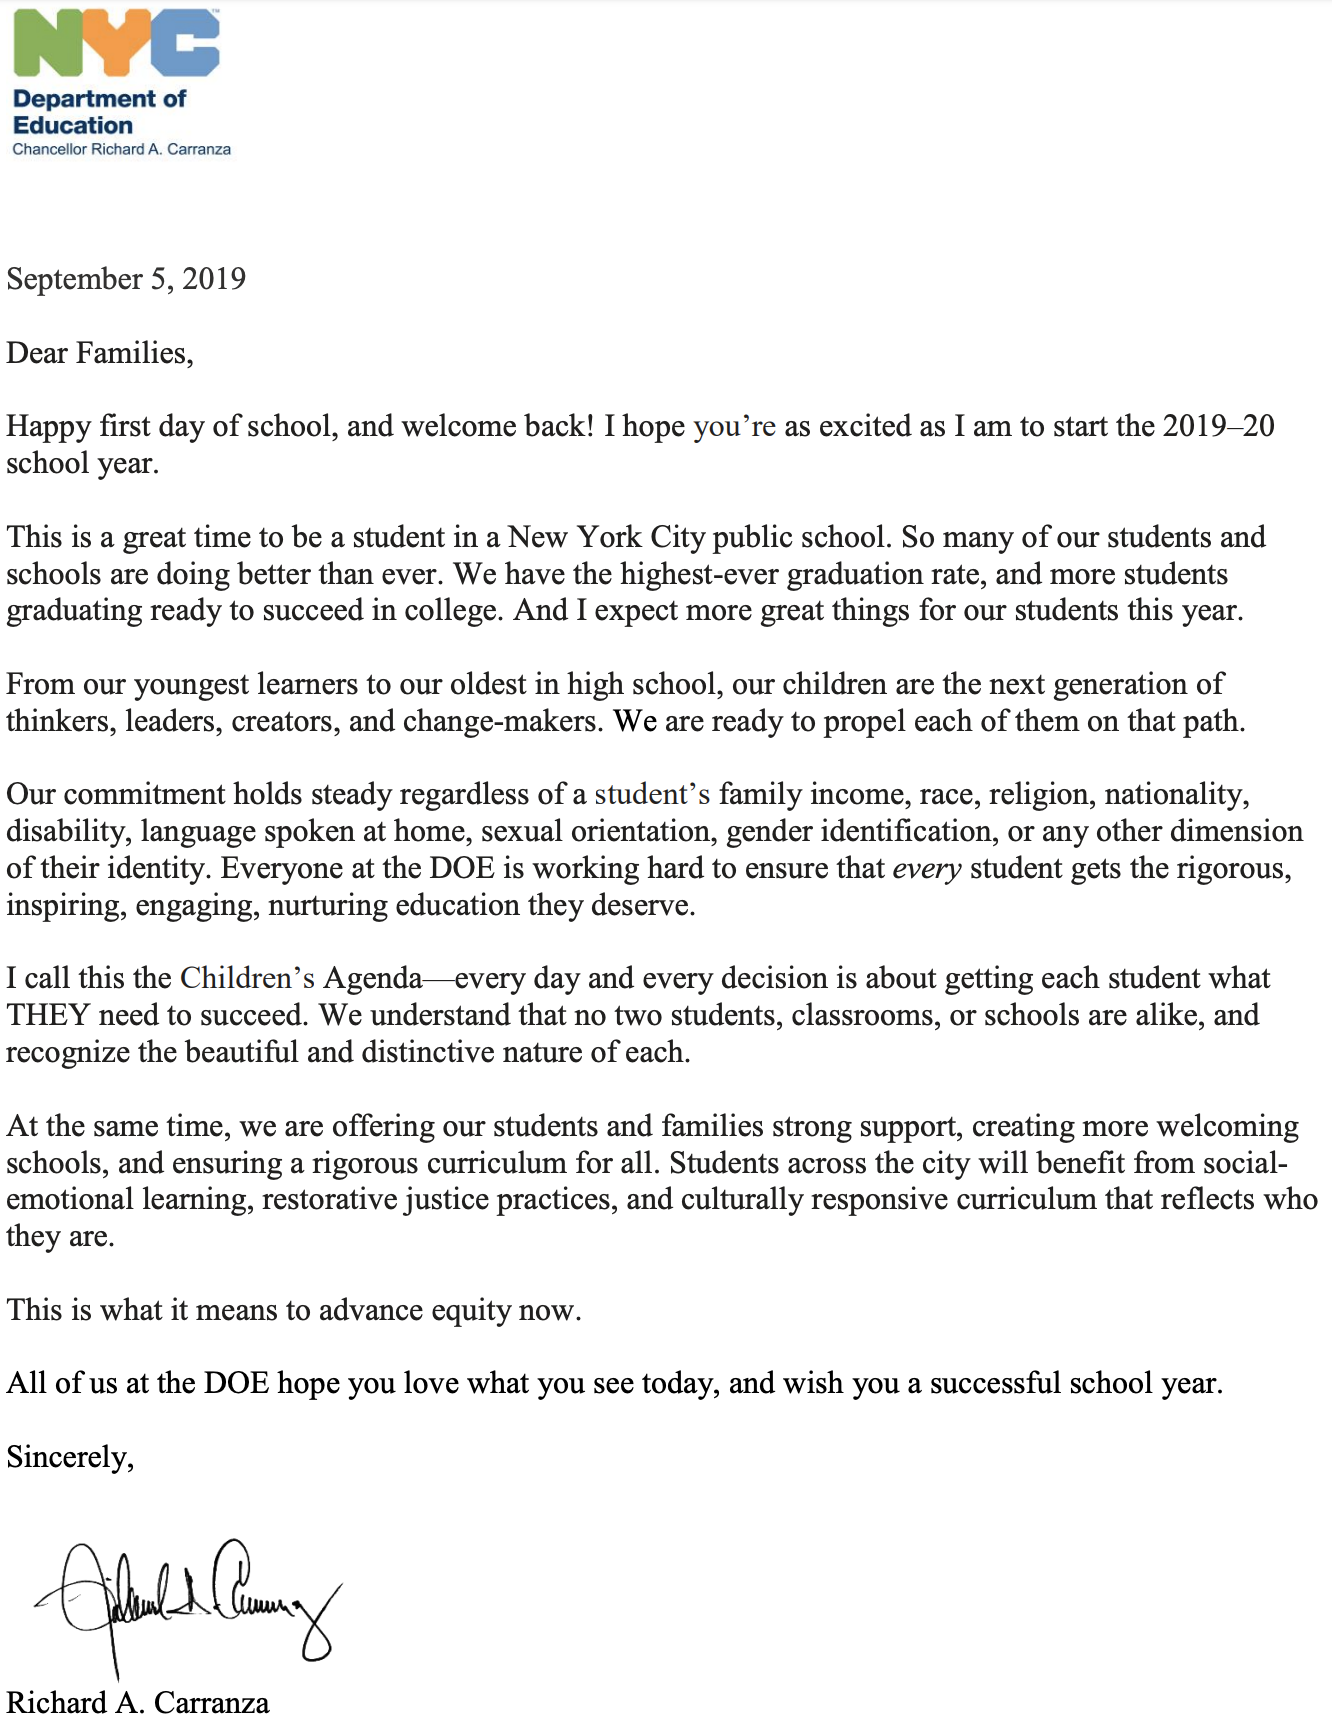 Welcome Letter from NYC DOE School's Chancellor, Richard Carranza. 